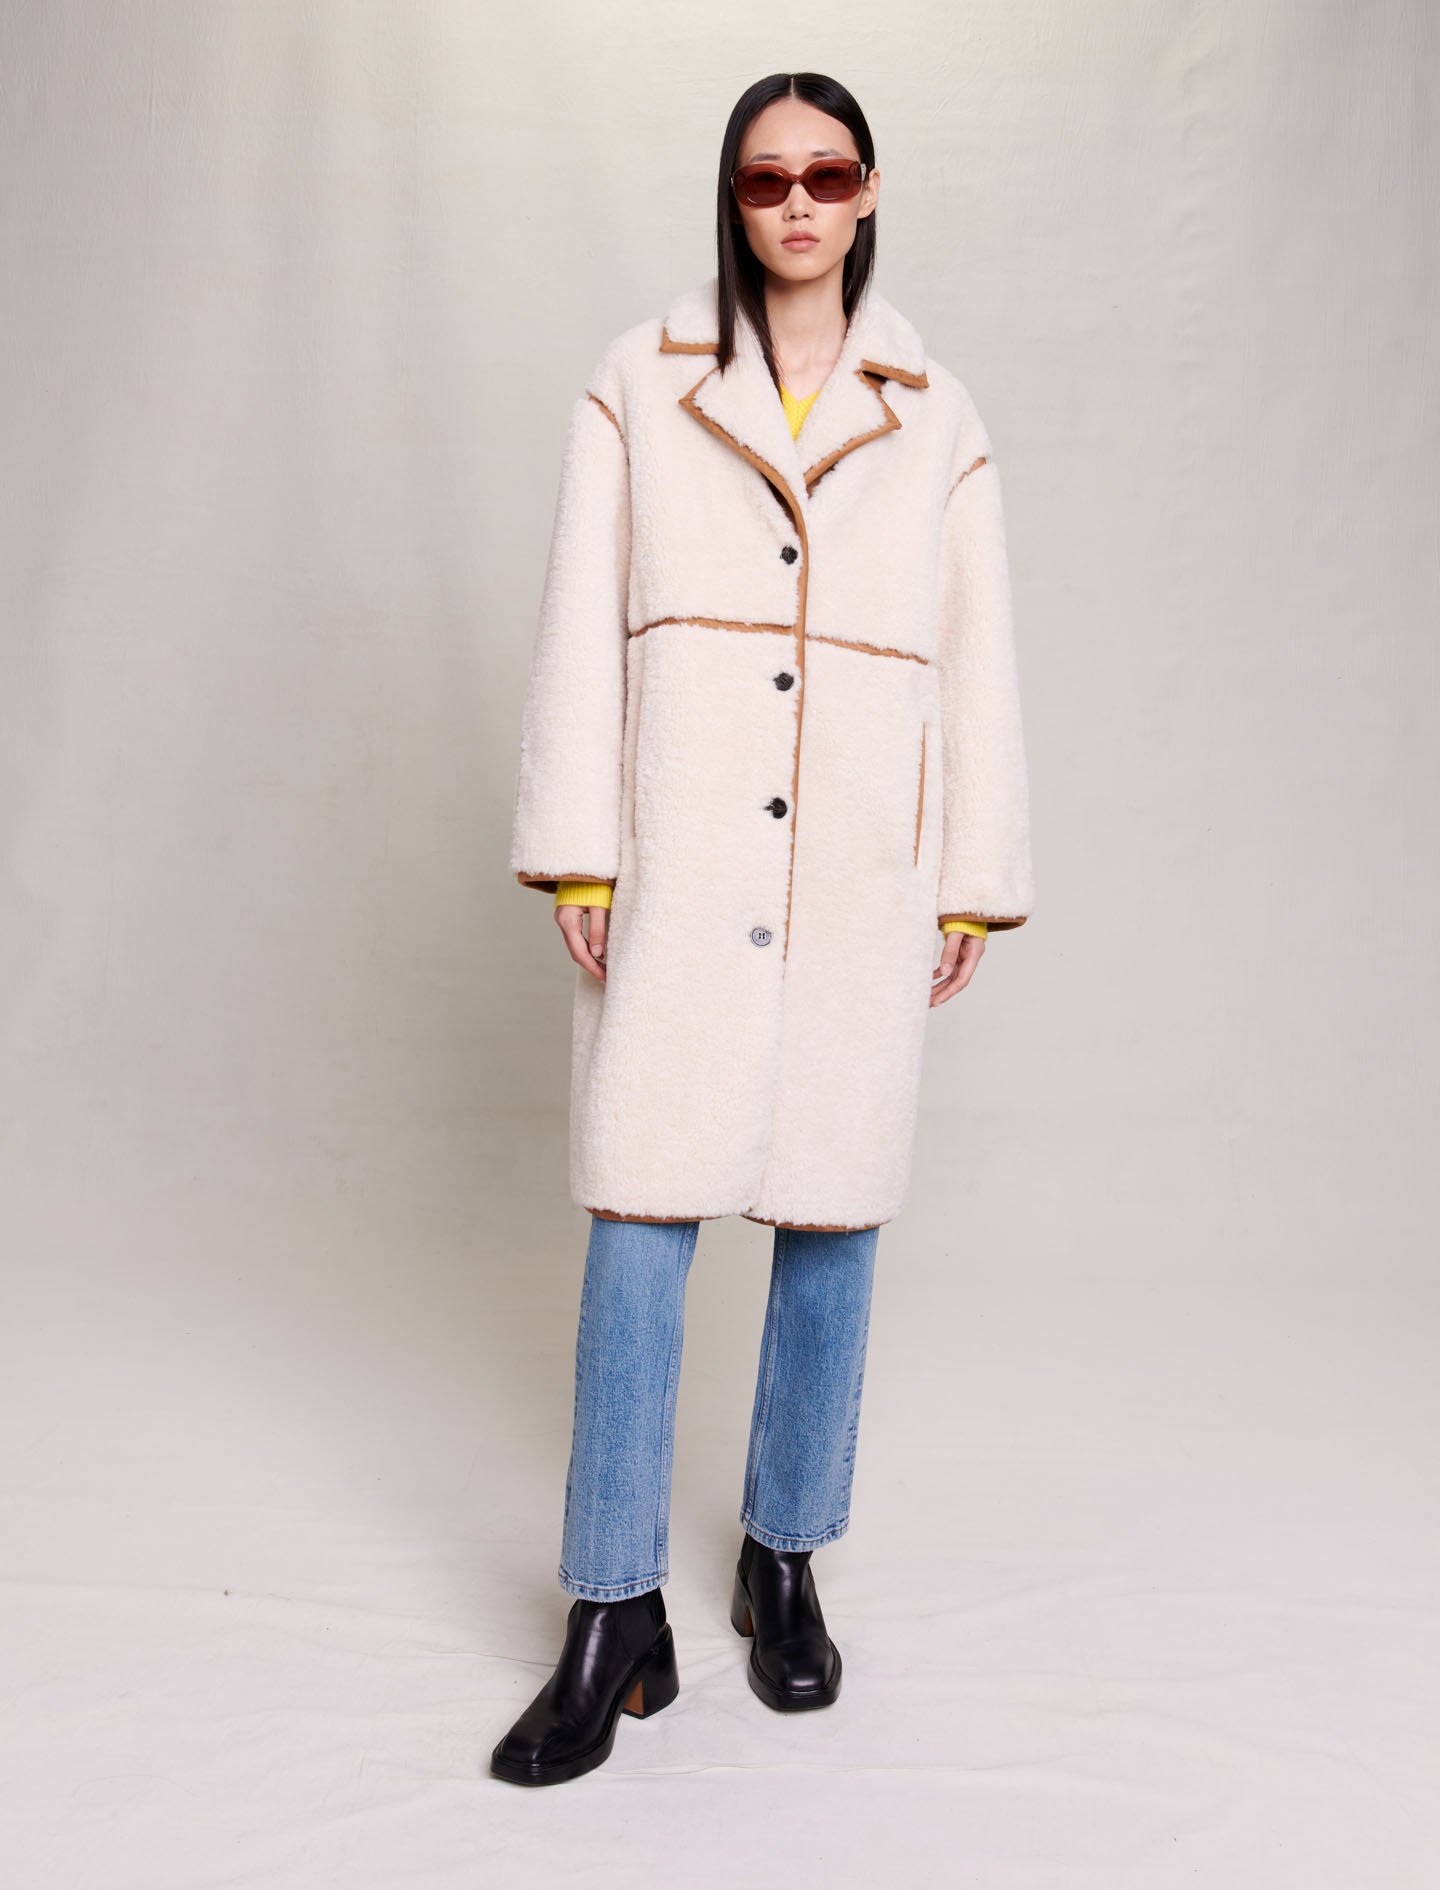 Maje Woman's polyester Interior: Long patchwork coat for Fall/Winter, in color Ecru / Beige